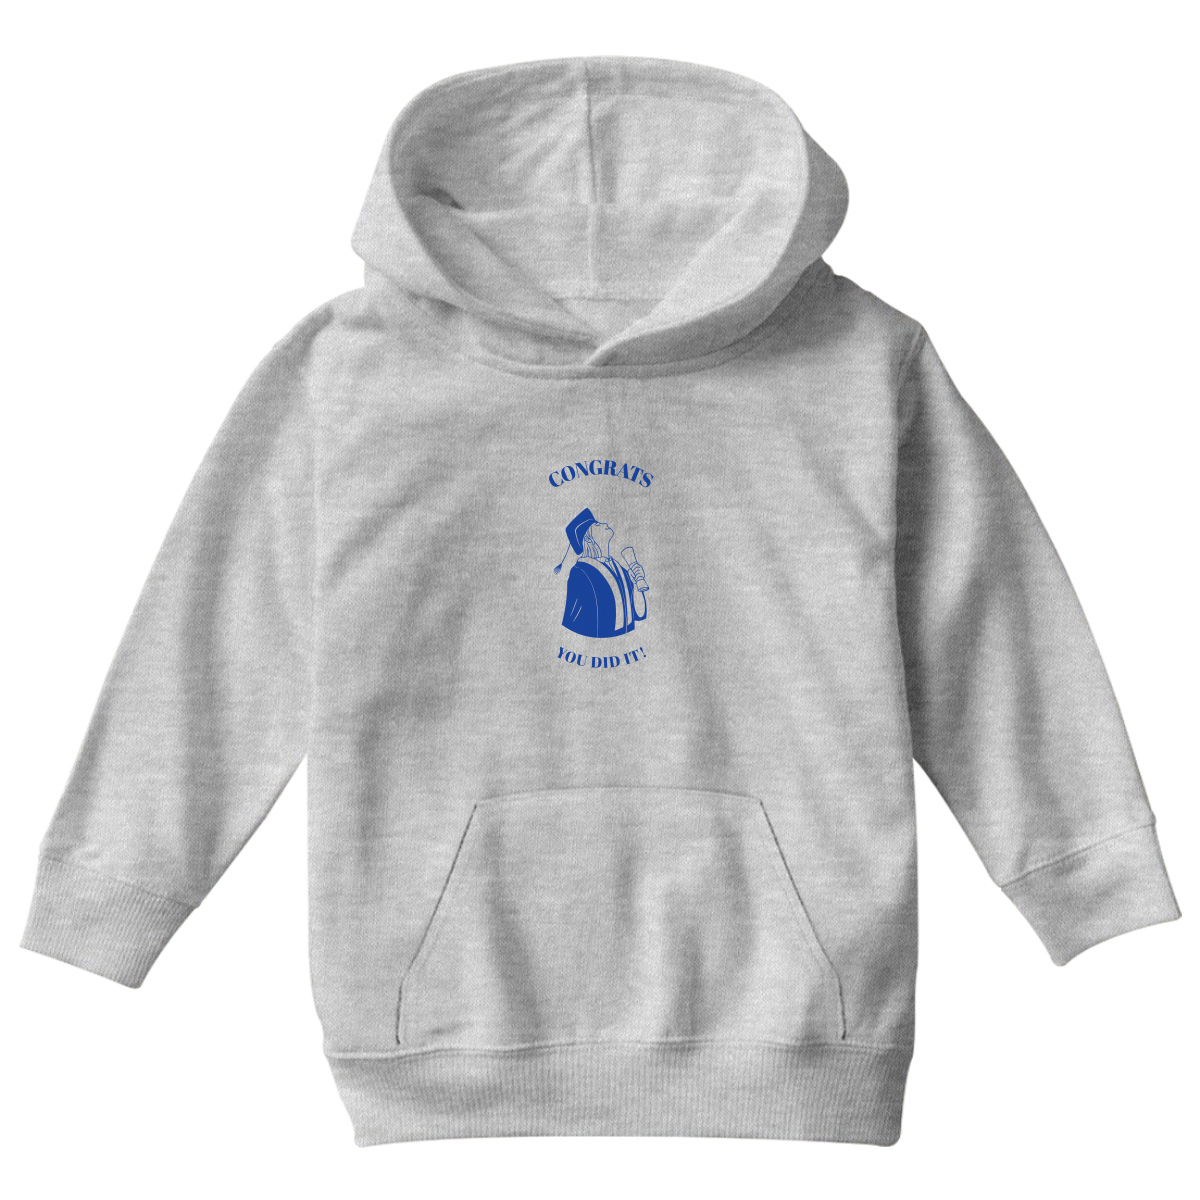 Congrats You Did It! Kids Hoodie | Gray